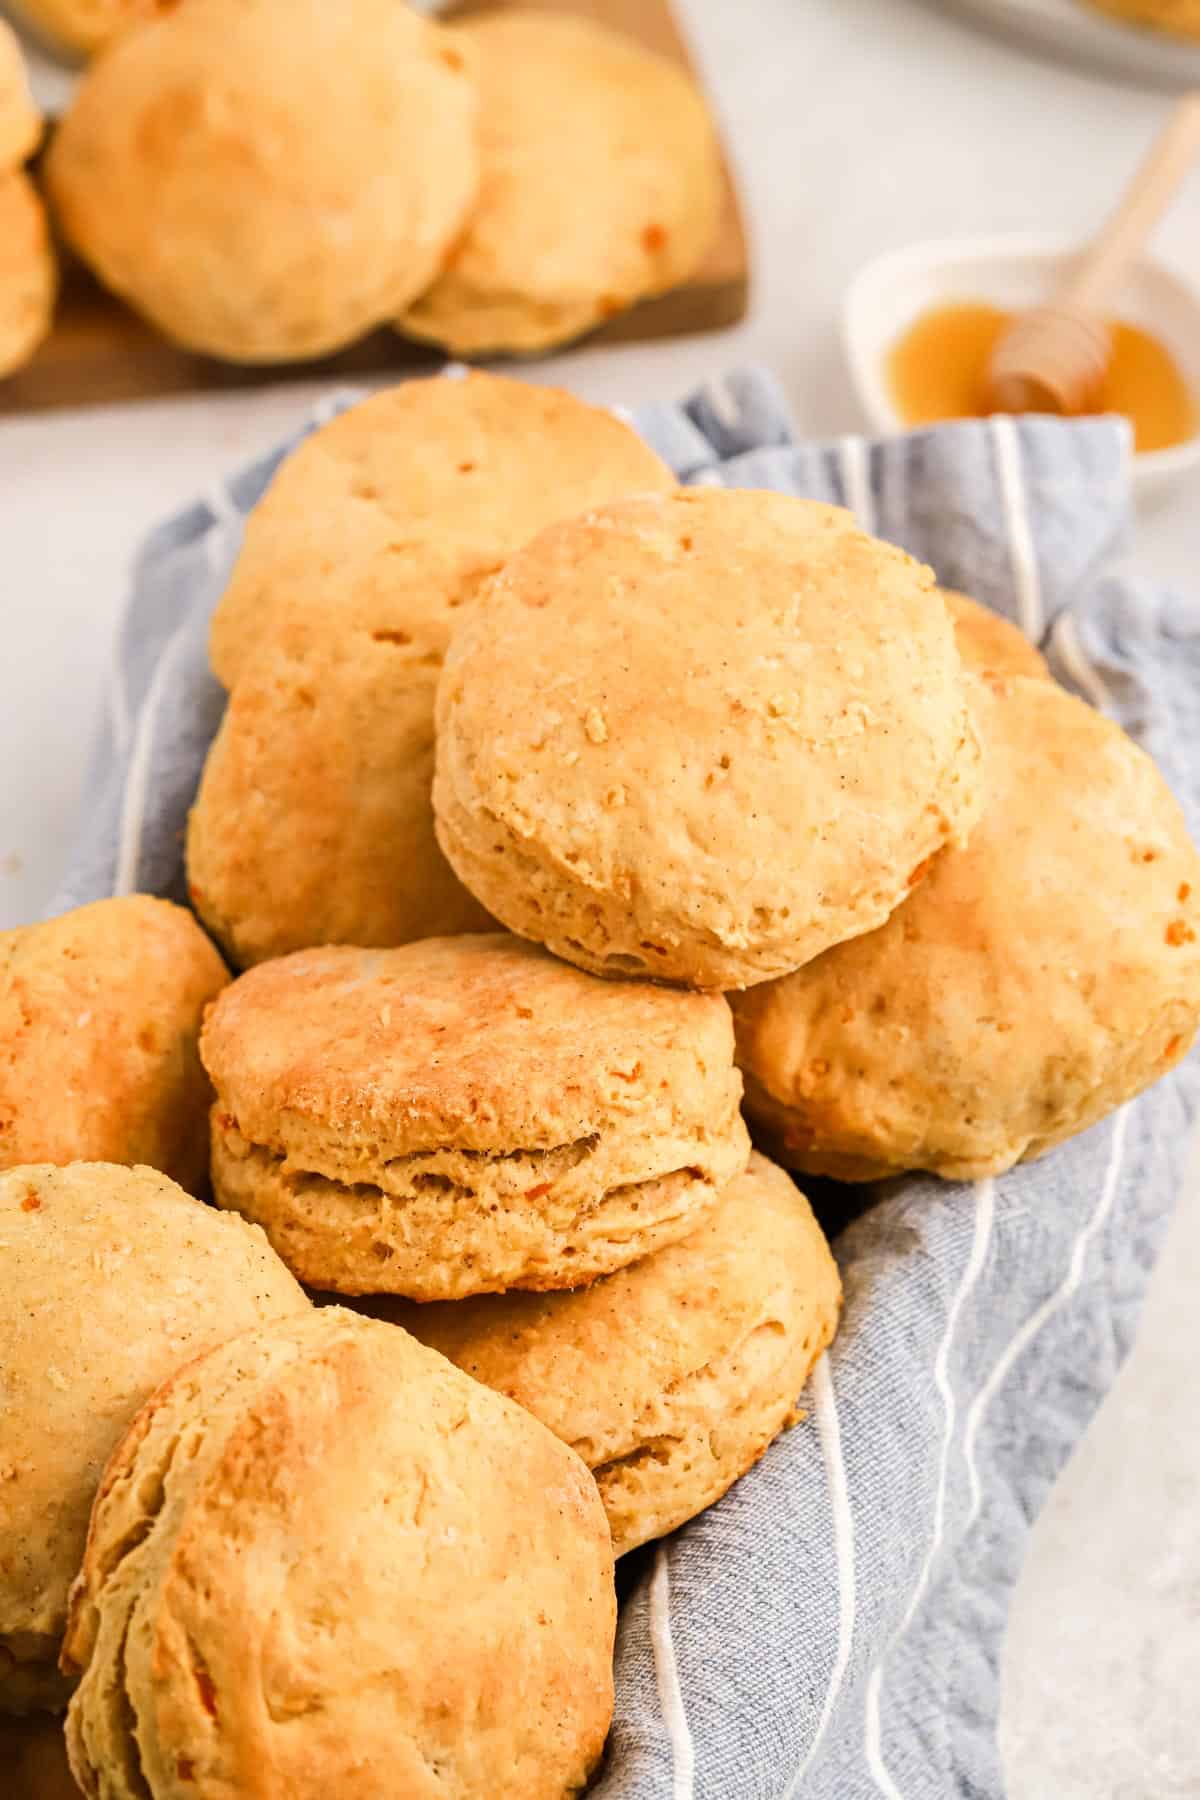 Sweet potato biscuits in a basket ready to eat.